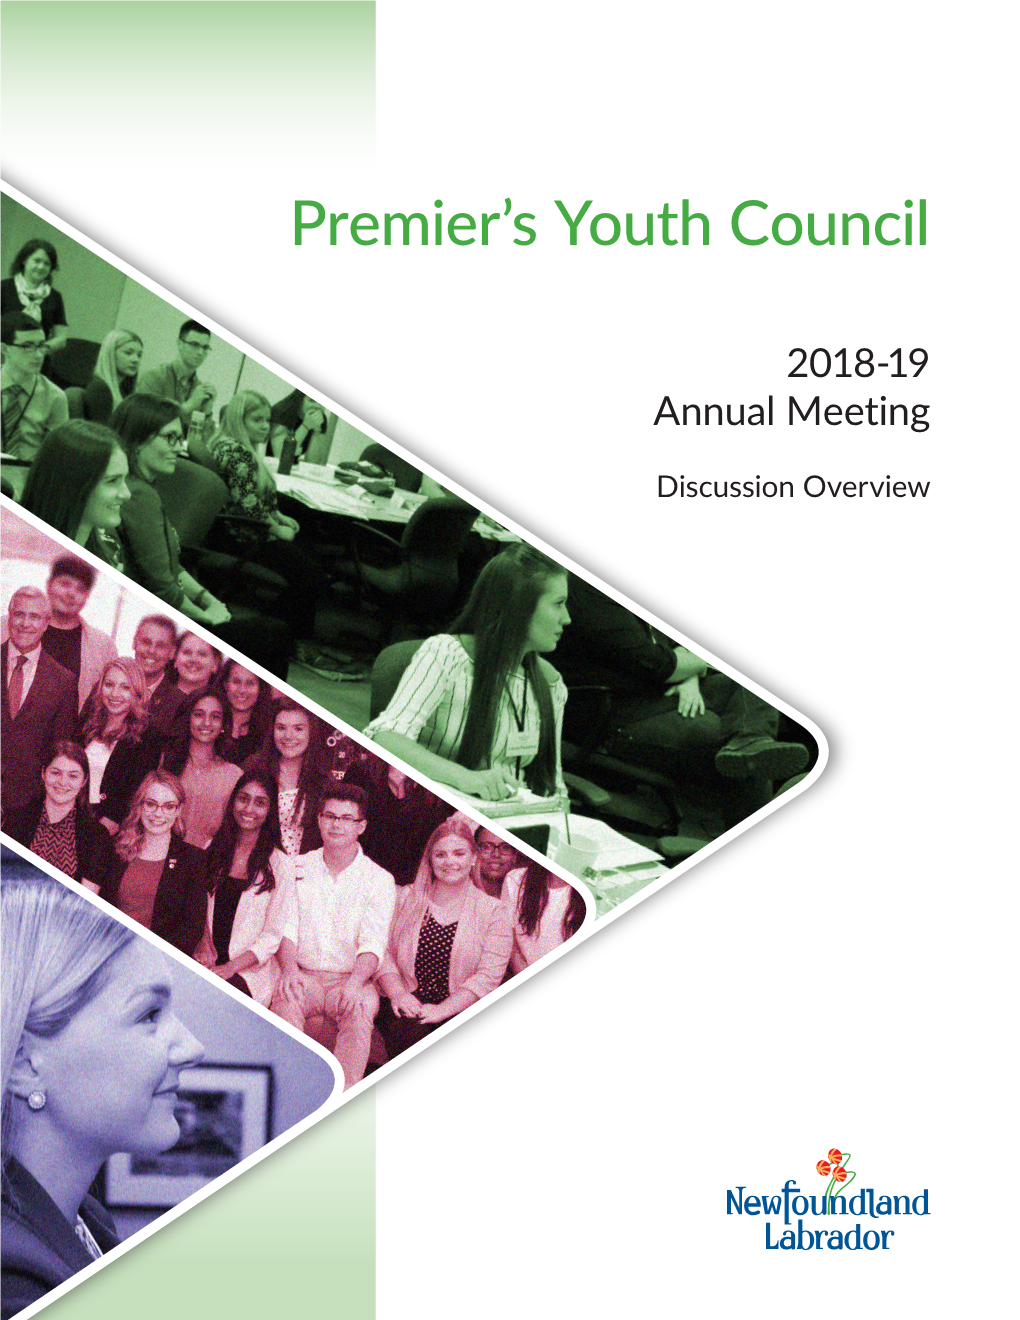 Premier's Youth Council